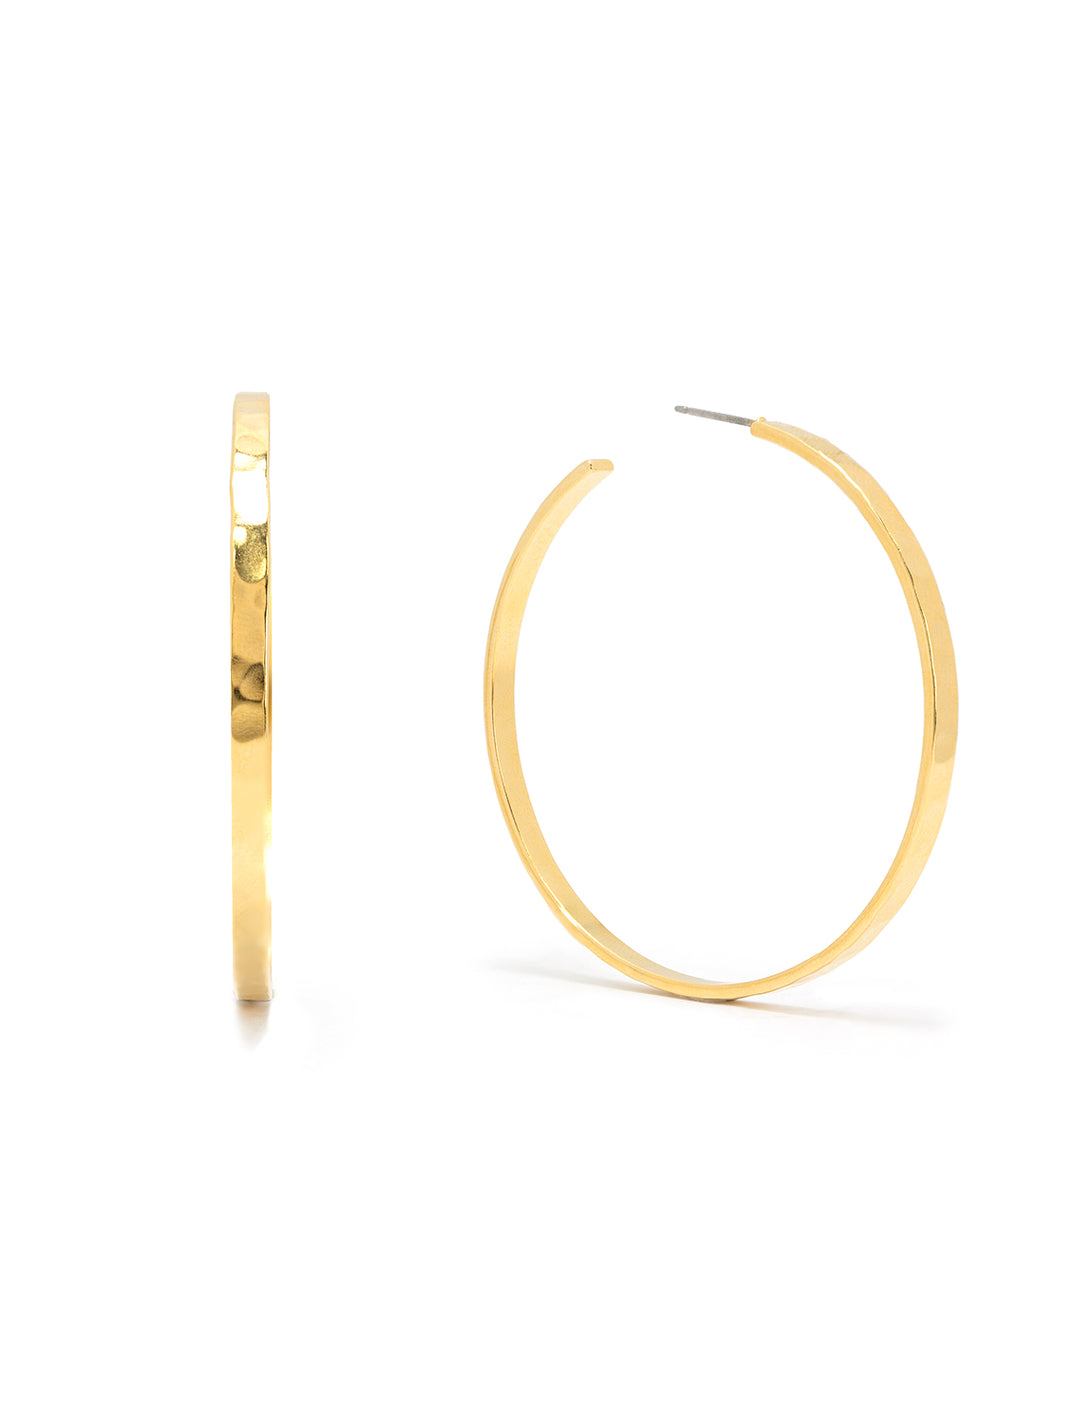 Front view of AV Max's hammered gold hoops.